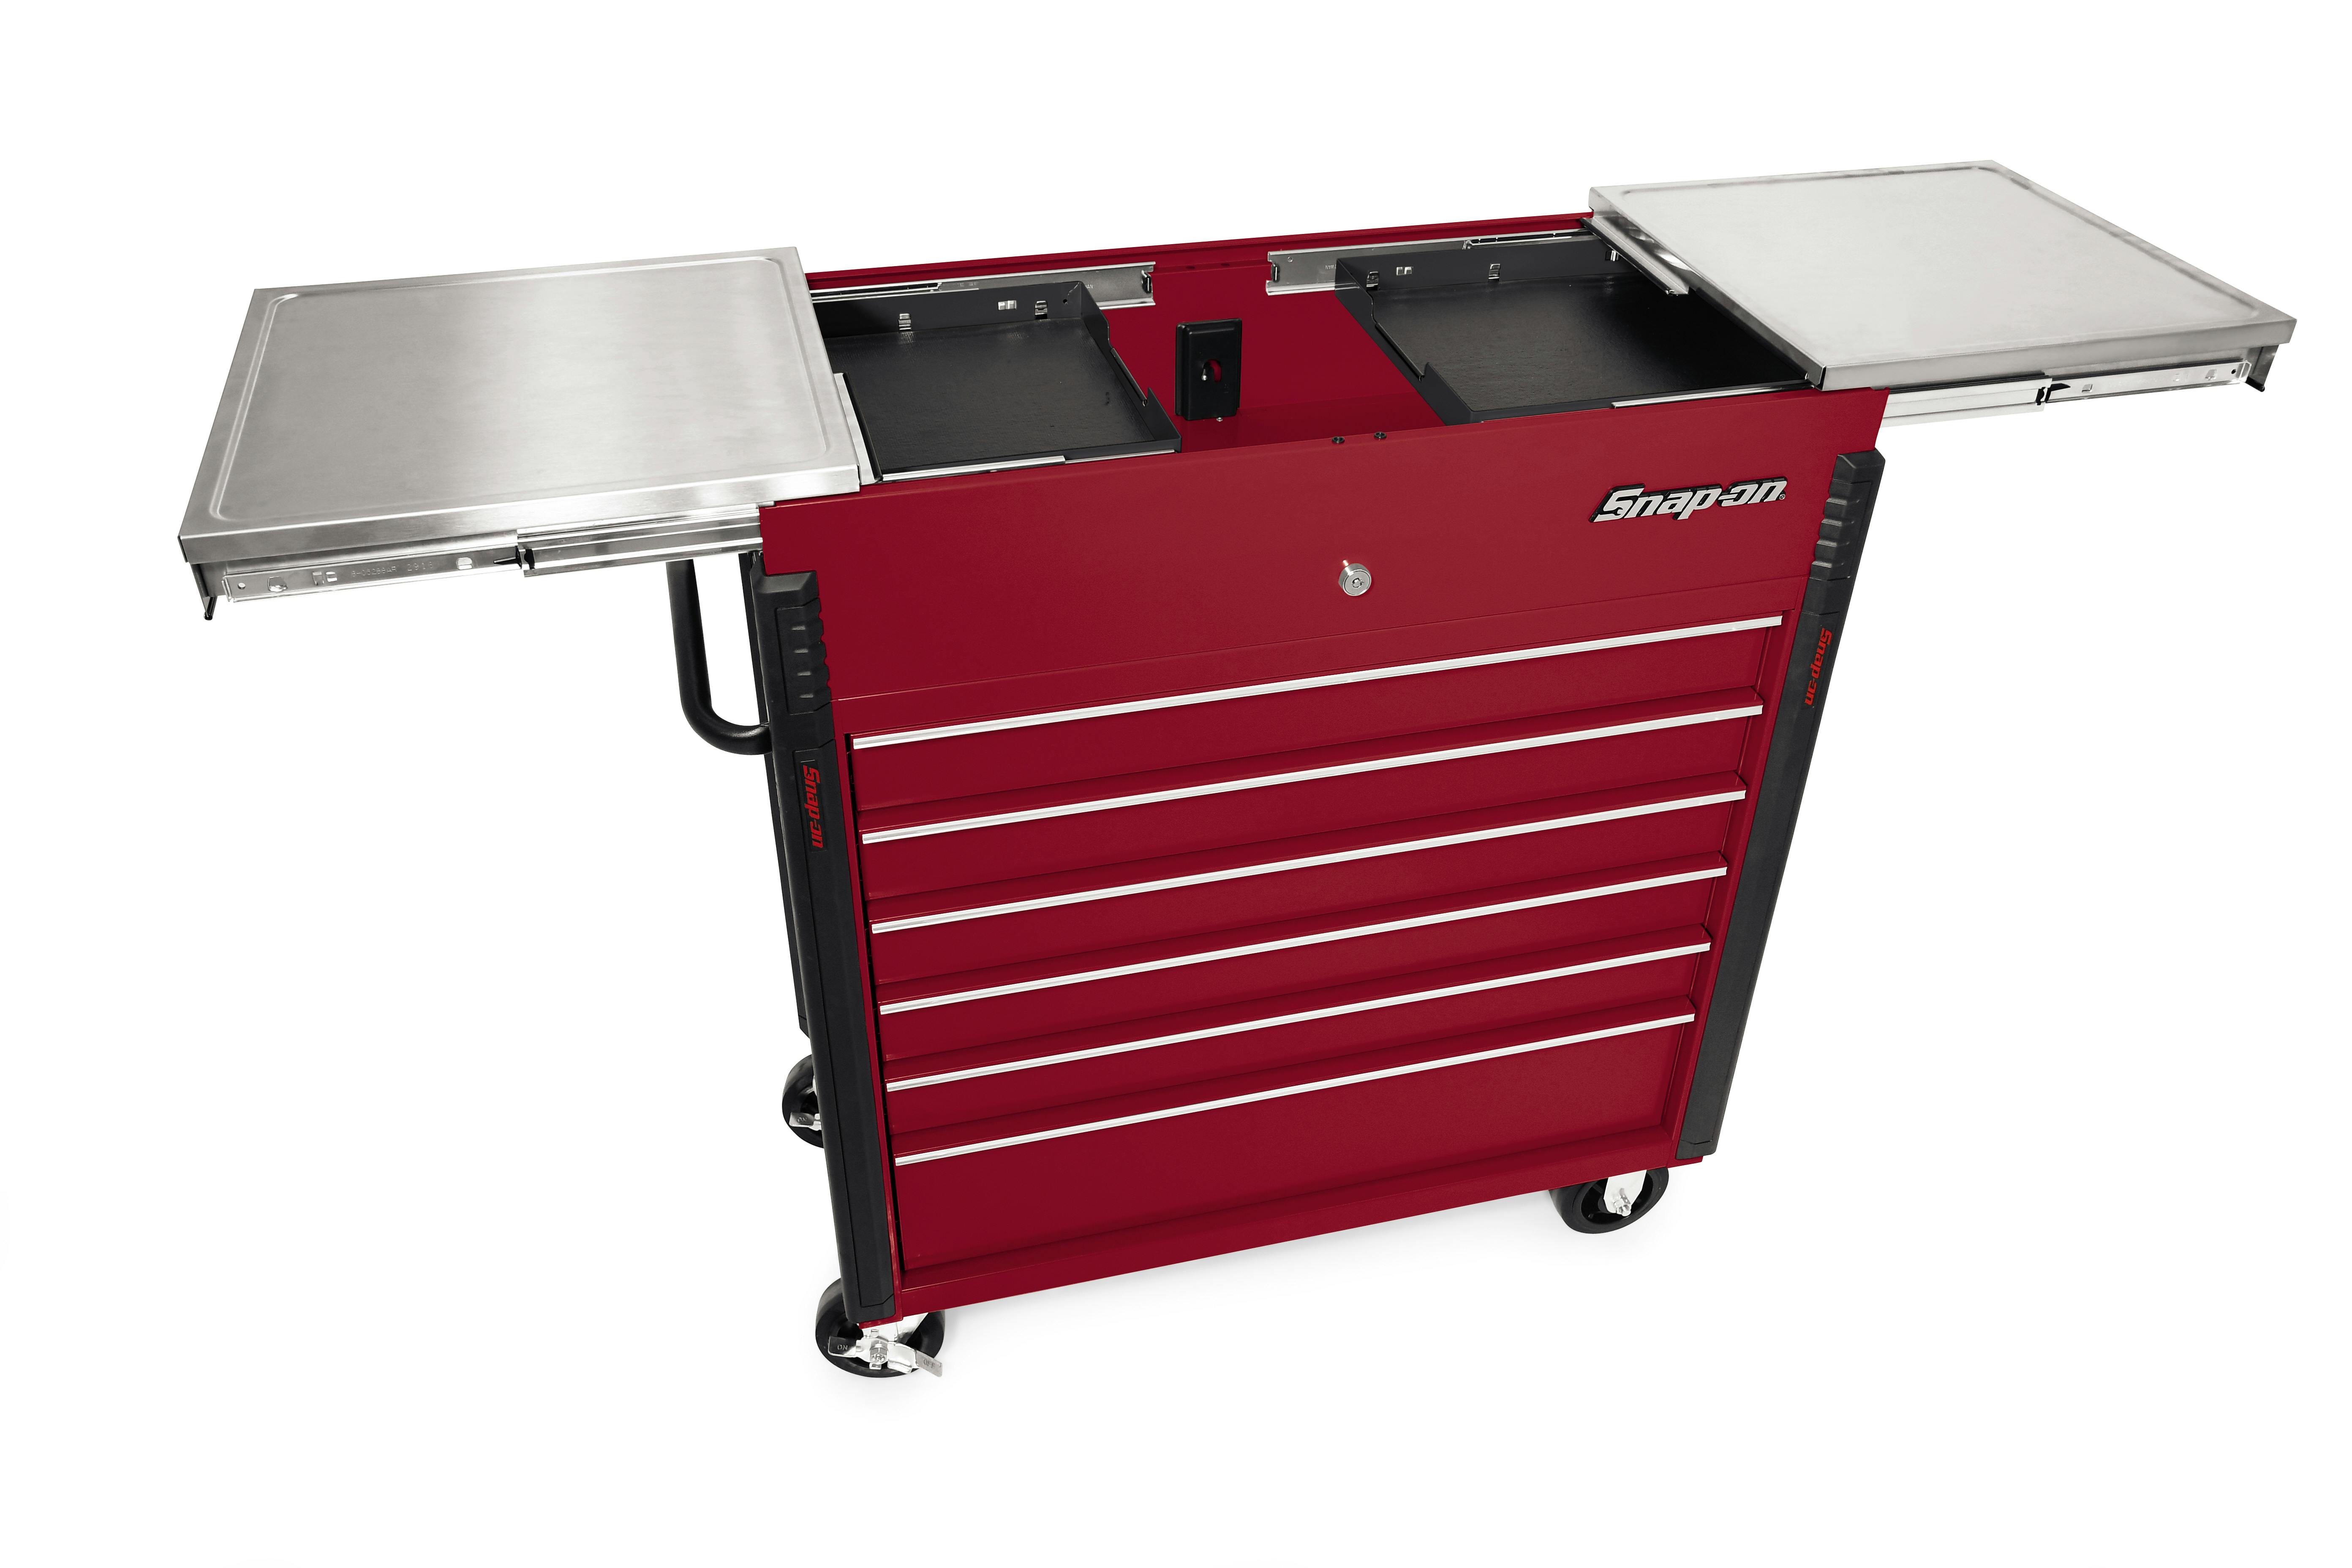 KRSC430 Series Roll Cart | Snap-on Store